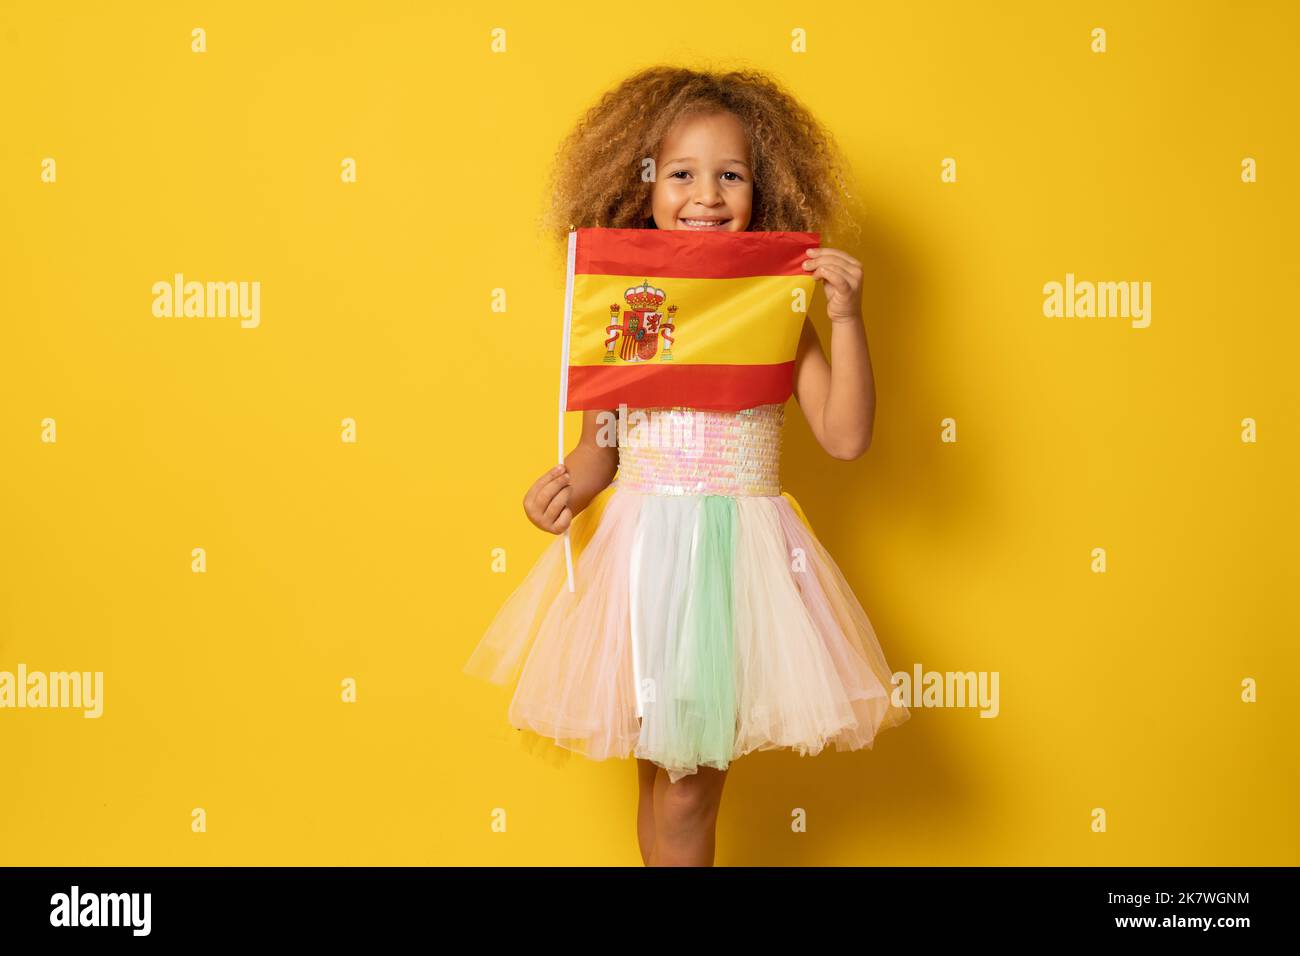 Cute little girl holding Spanish flag standing isolated over yellow background. Stock Photo